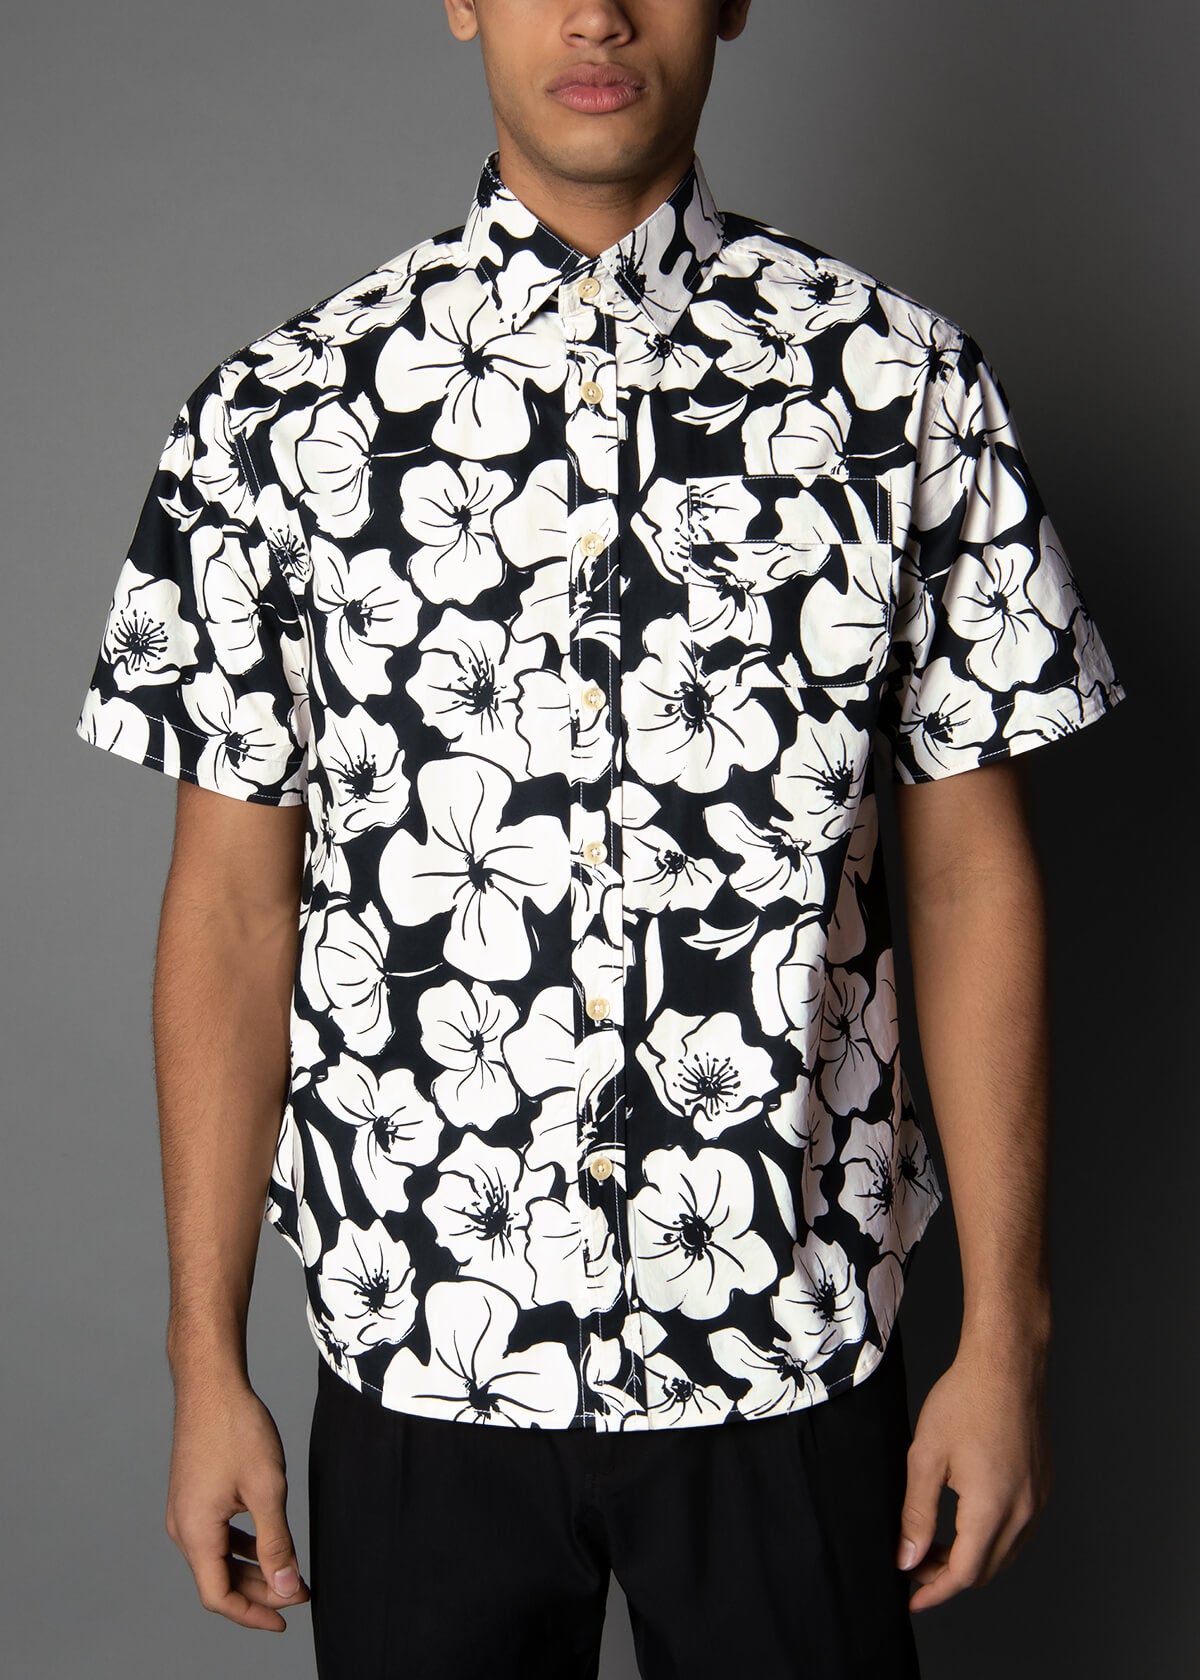 relaxed-fit short-sleeve men's shirt with a black and white floral print